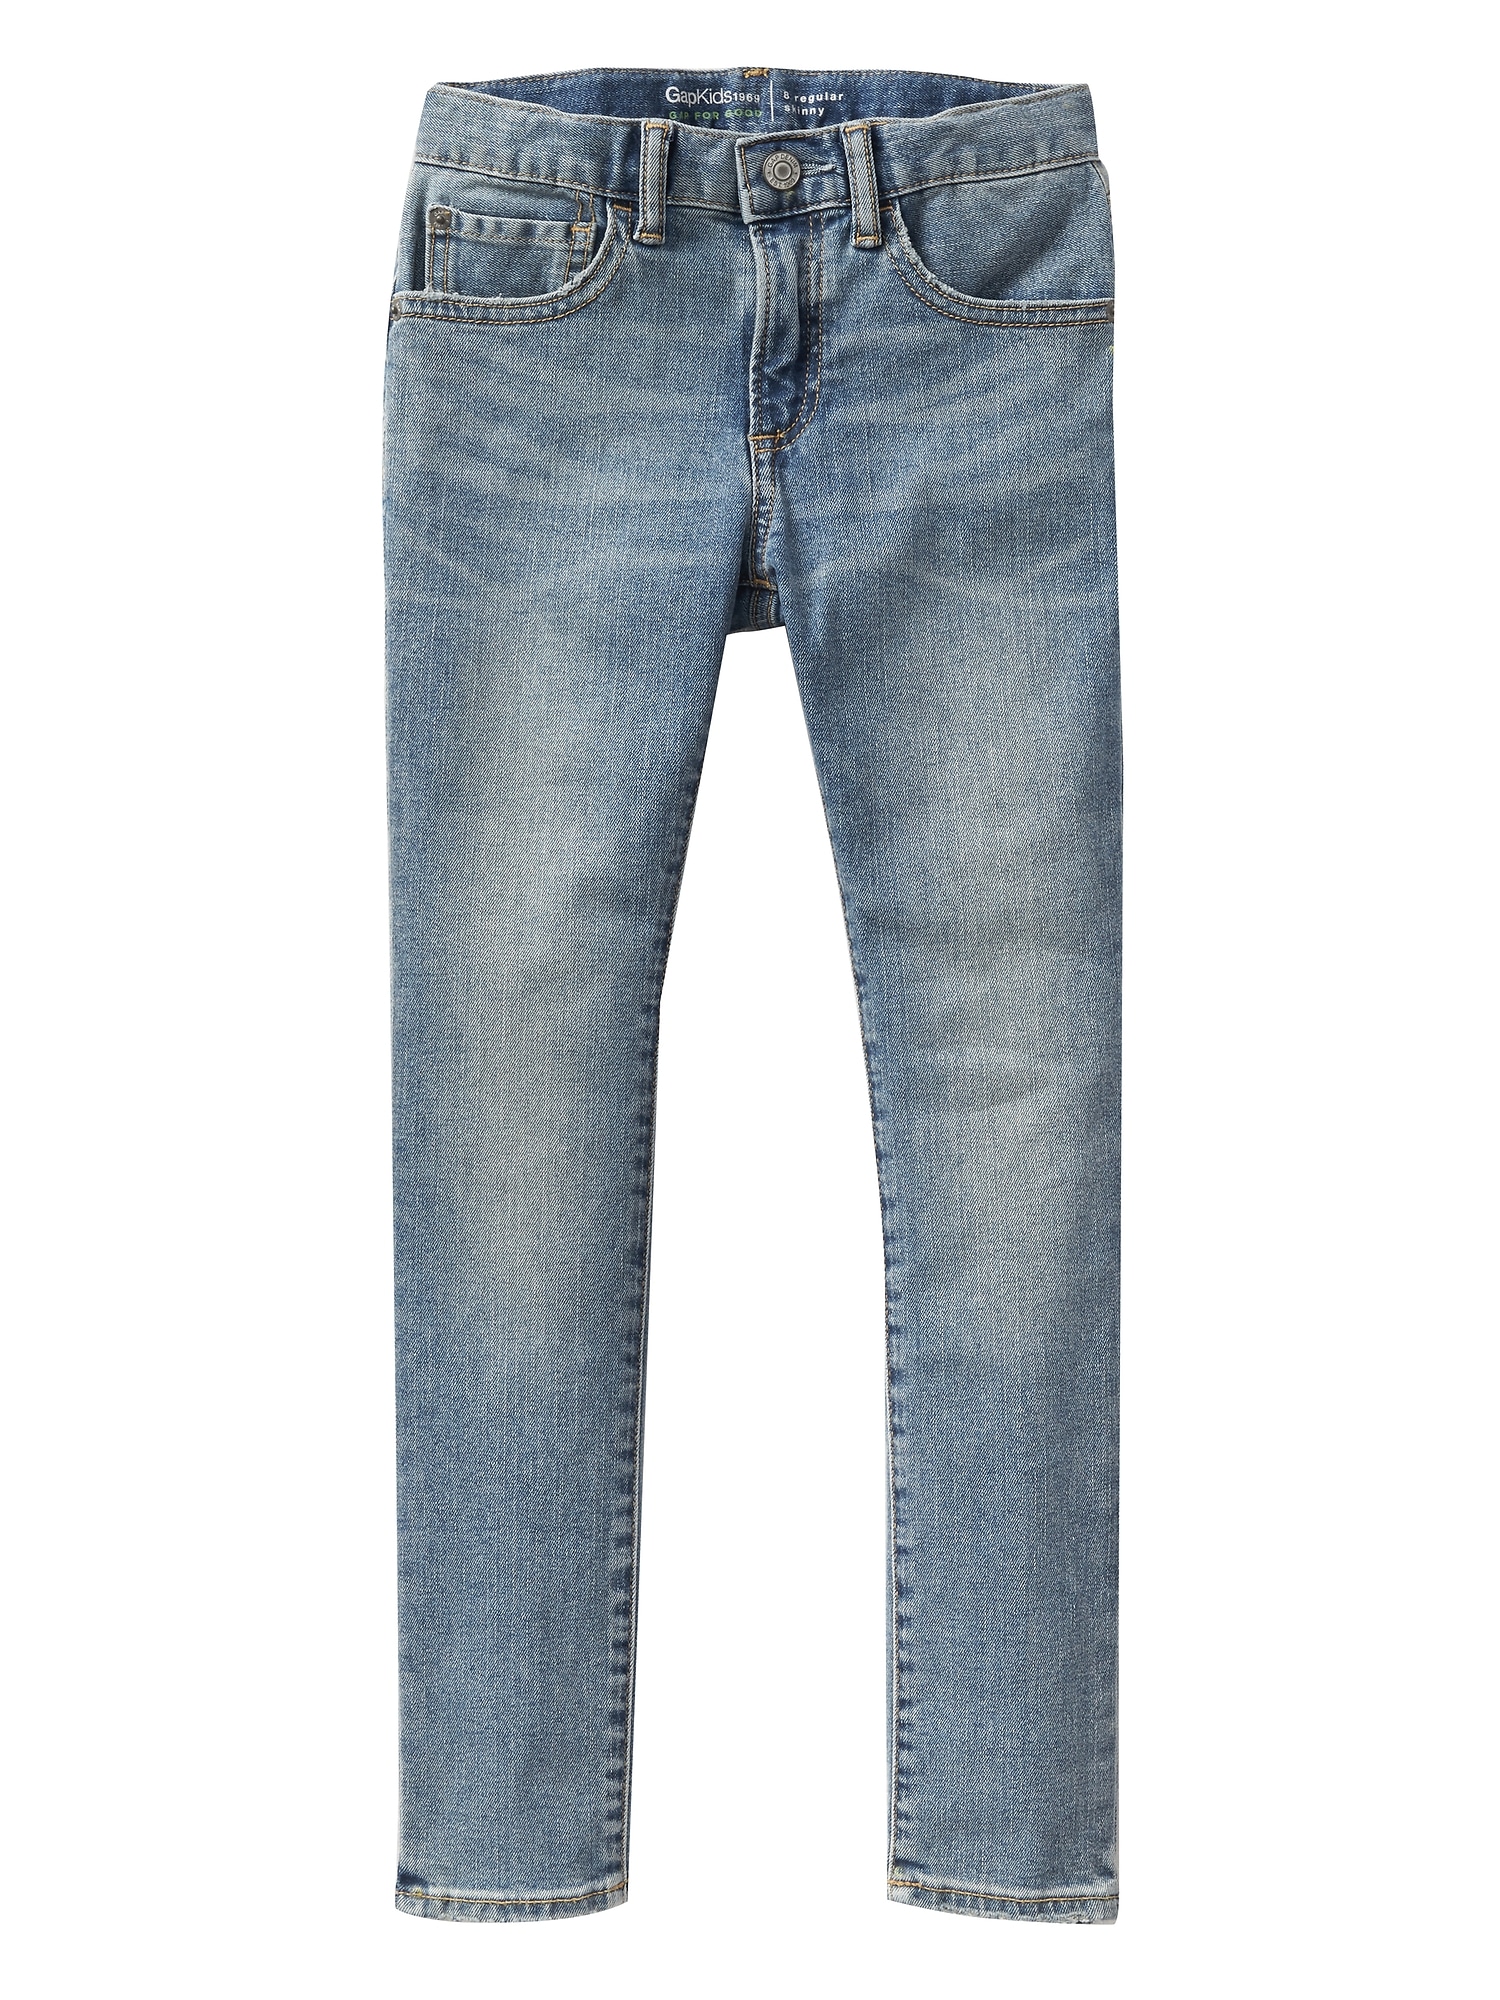 Kids Skinny Fit Jeans With Washwell™ | Gap Factory